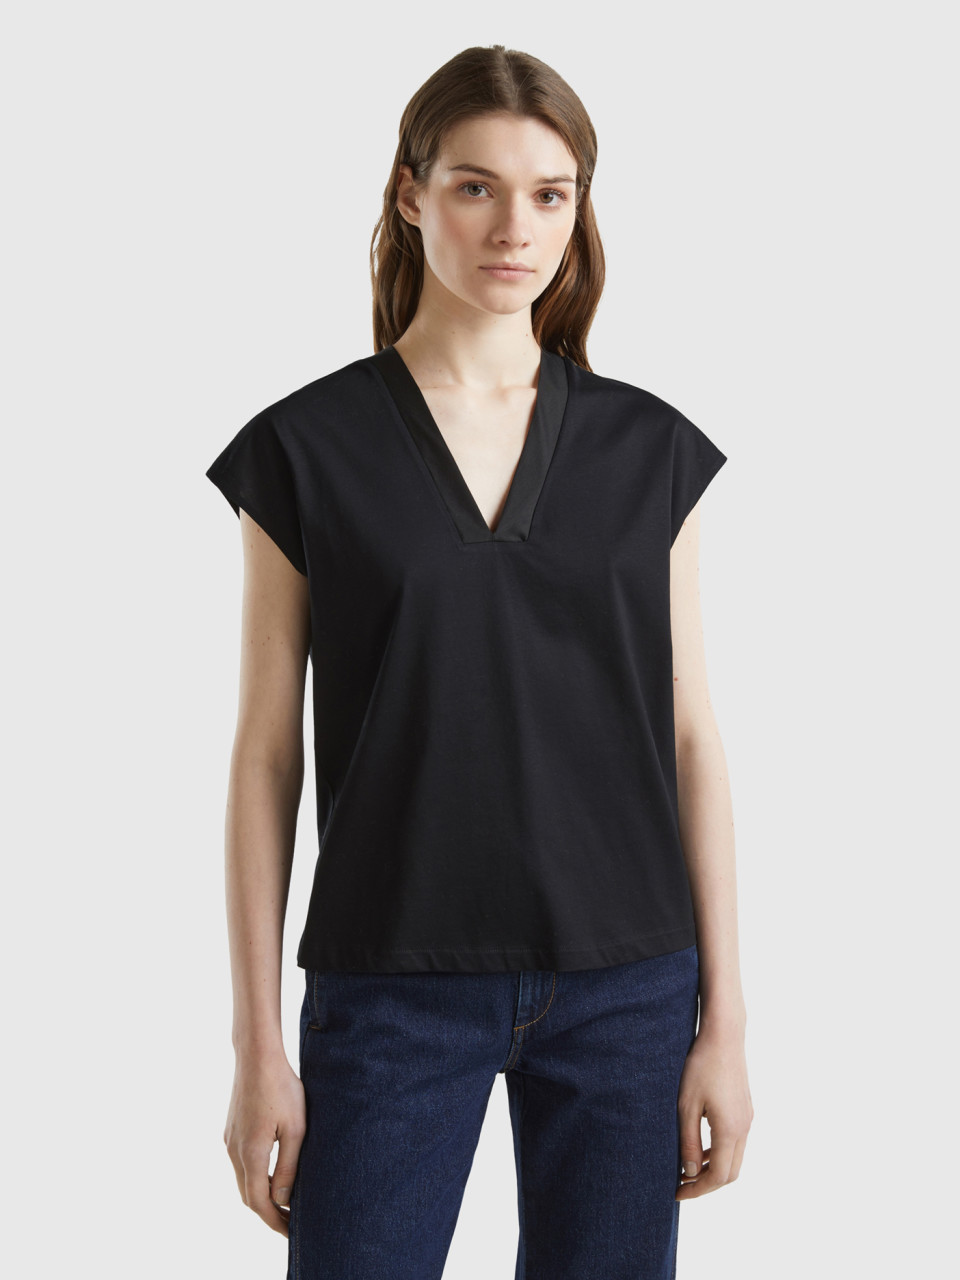 Benetton, T-shirt With Front And Back V-neck, Black, Women